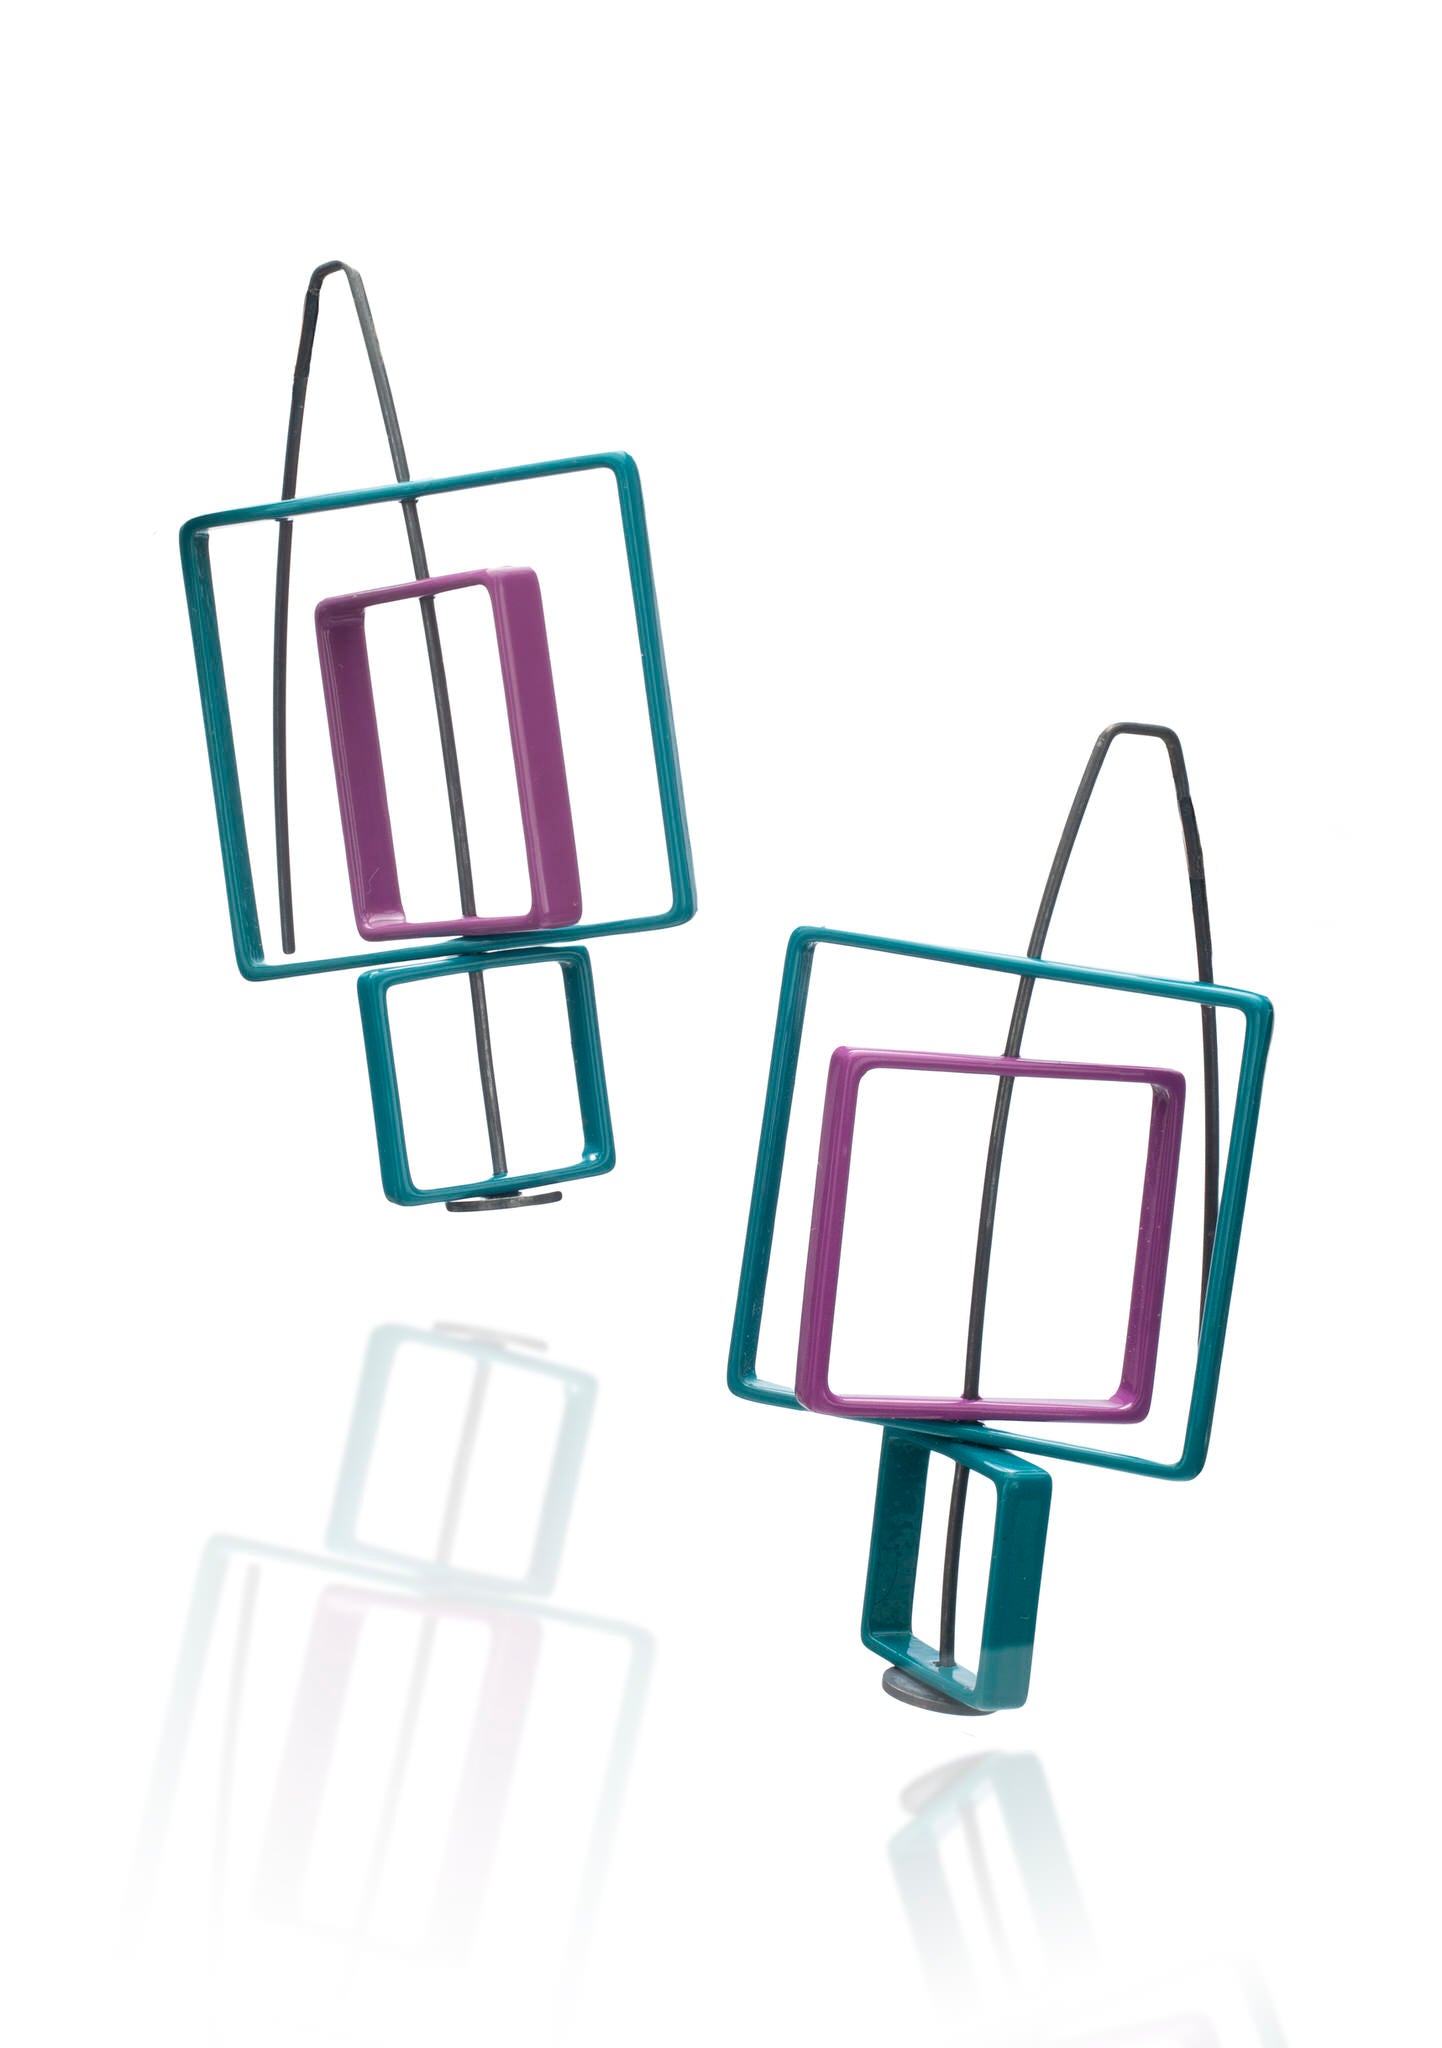 Moveable 3 Square Earrings